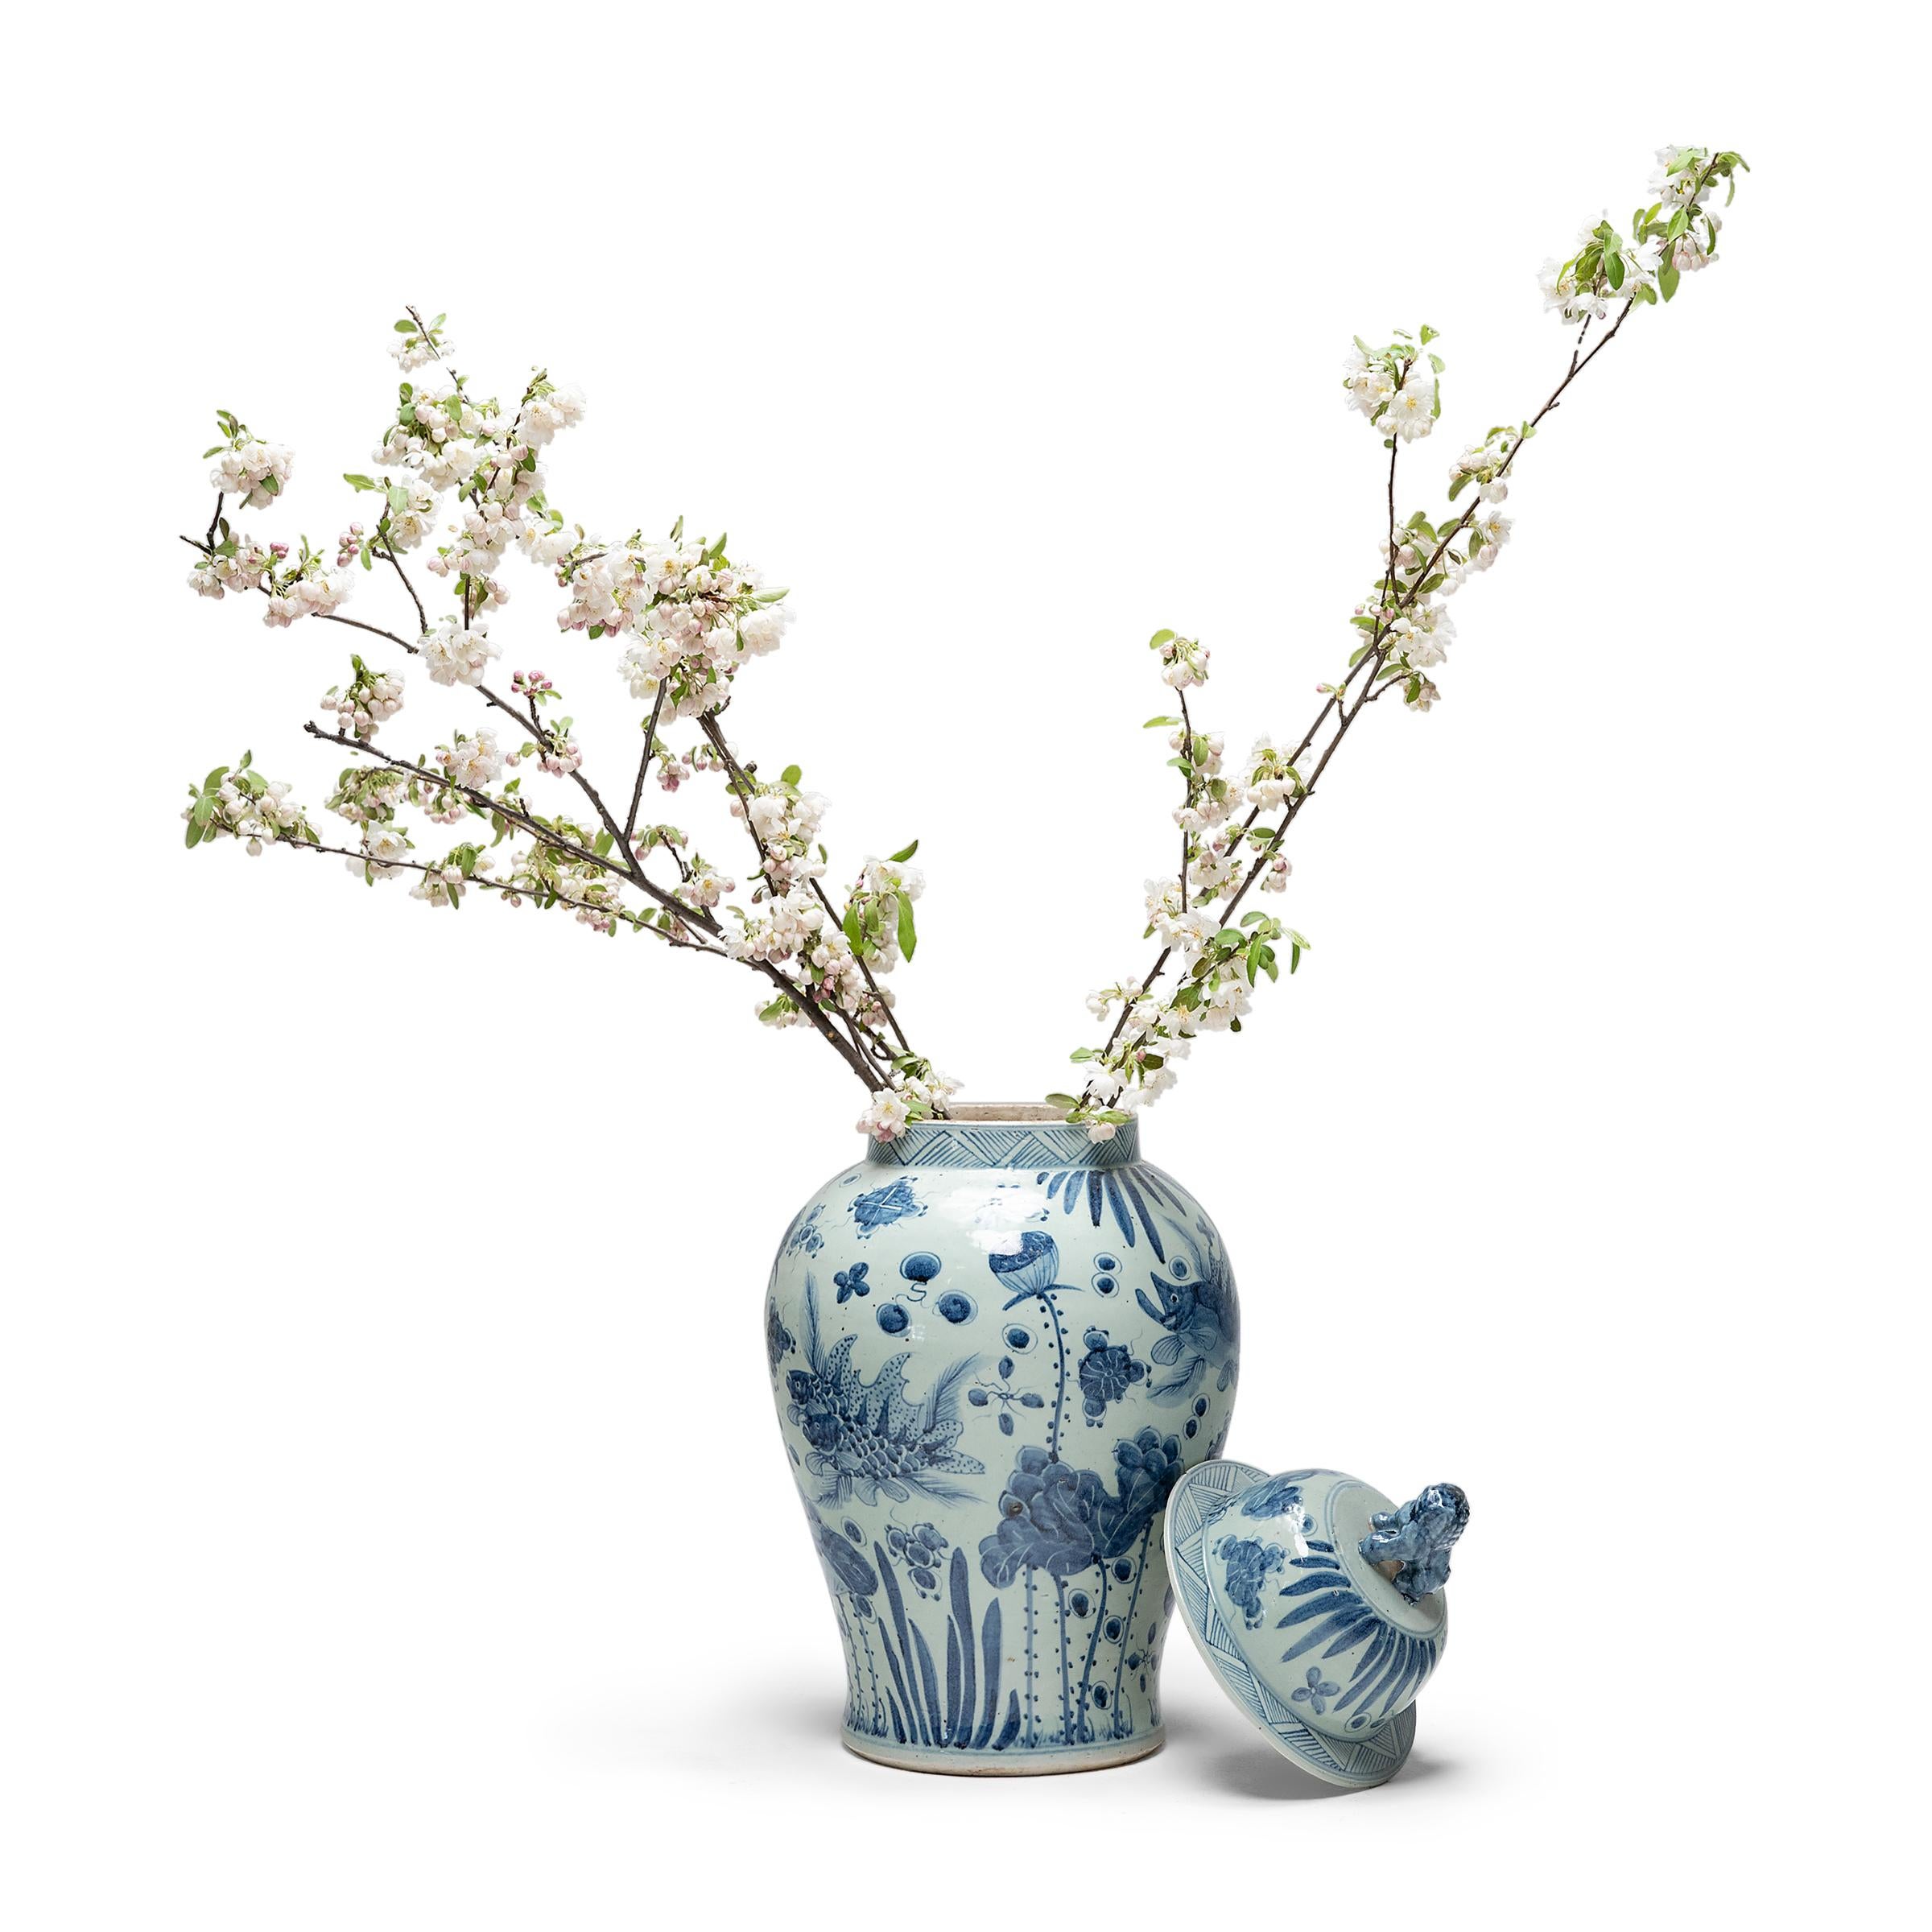 This blue-and-white covered jar is hand-painted with flora and fauna of the sea, offering blessings of wealth, abundance, and the contented harmony of a fish in water. Chinese blue-and-white ceramics have inspired ceramists worldwide since cobalt